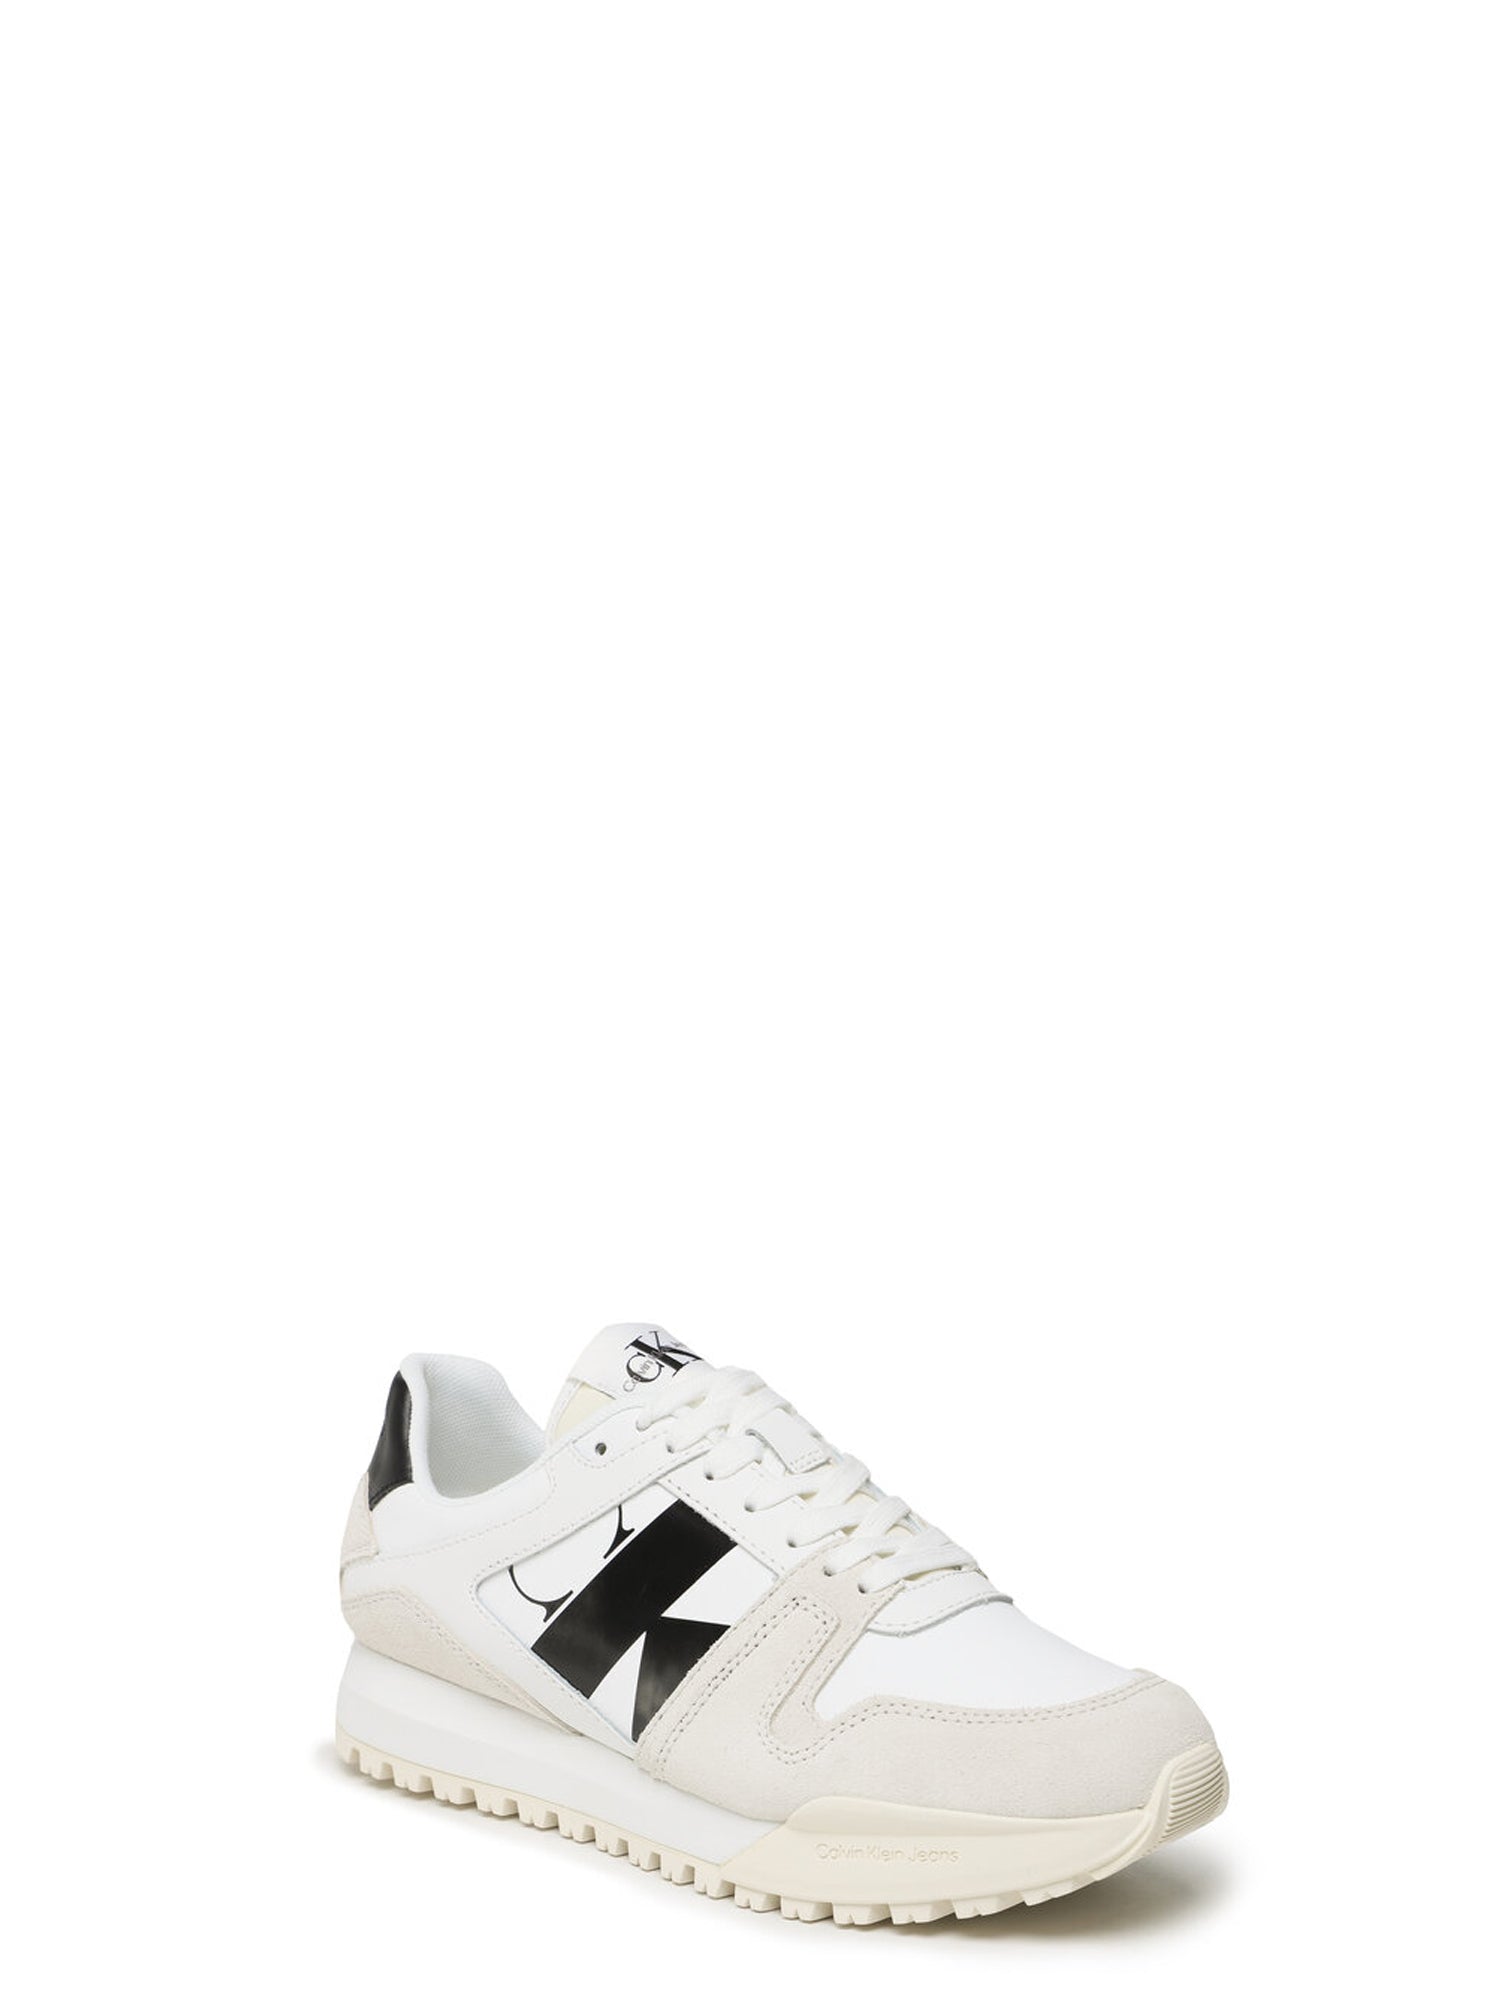 CALVIN KLEIN SHOES SNEAKERS BASSE TOOTHY RUN LACEUP LOW LTH MIX BIANCO